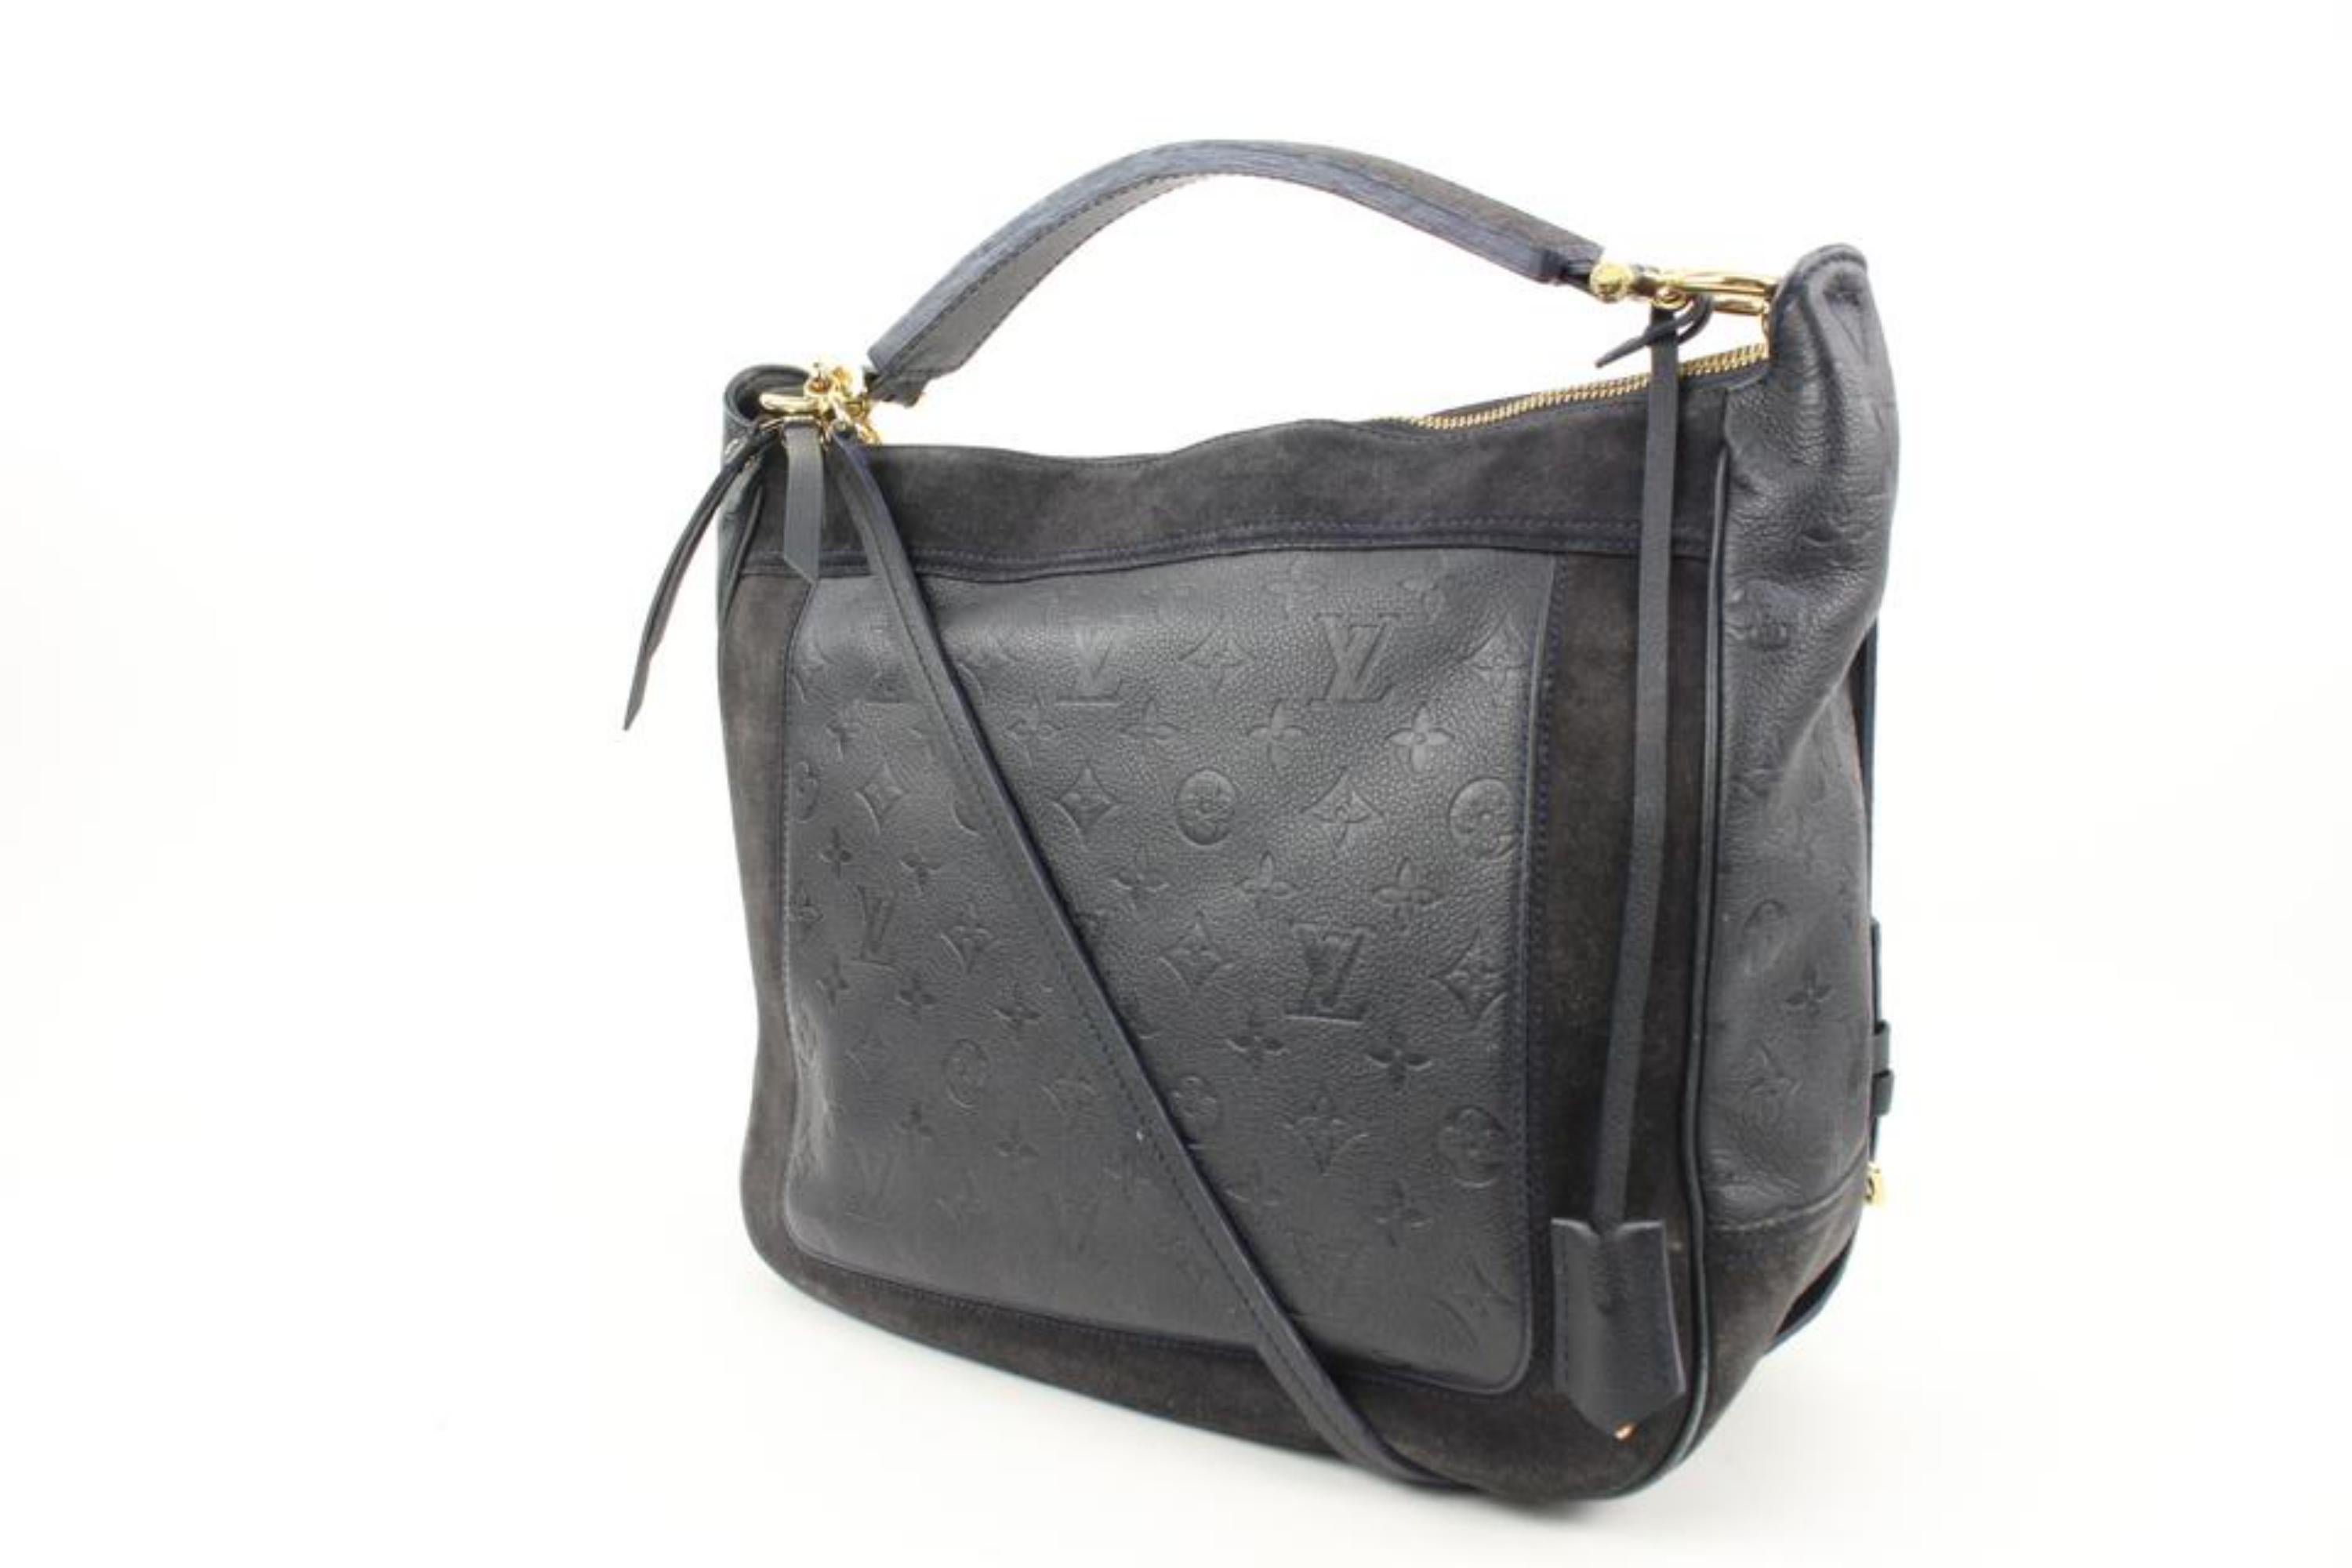 Louis Vuitton Navy Monogram Leather Empreinte Audacieuse PM 2way Hobo Artsy 24lv127s
Date Code/Serial Number: AR4111
Made In: France
Measurements: Length:  16.5